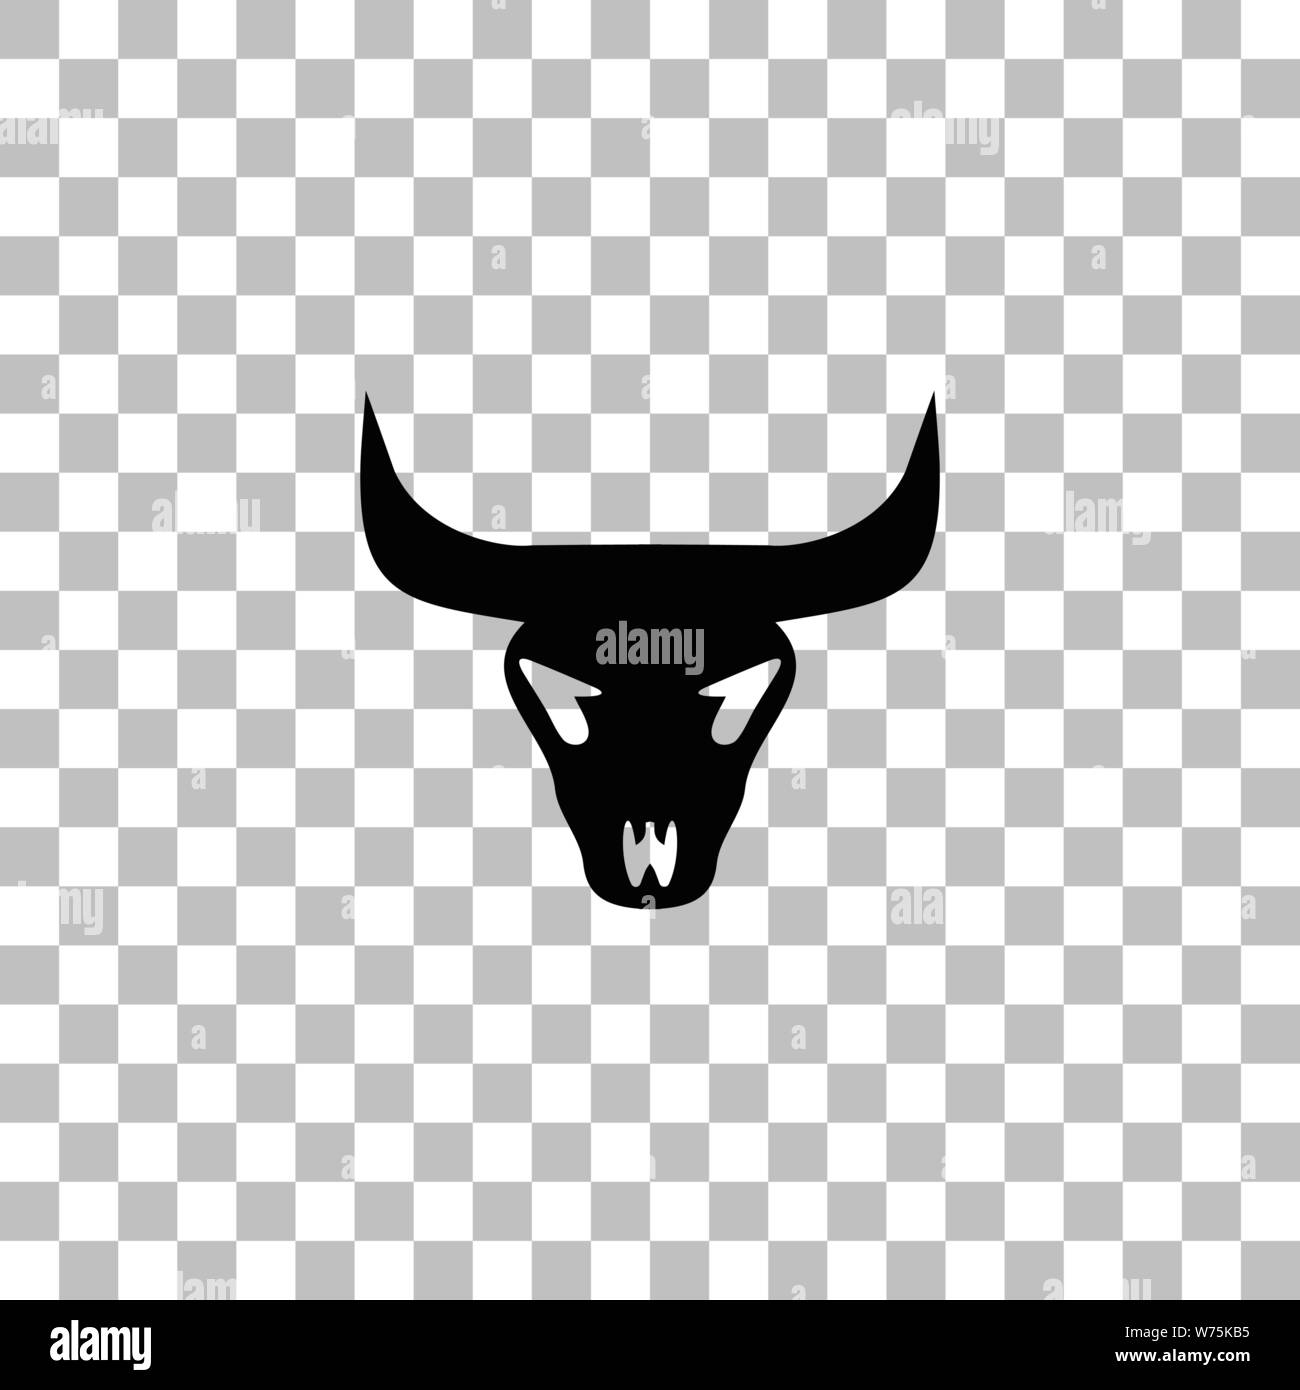 Bull skull. Black flat icon on a transparent background. Pictogram for your project Stock Vector